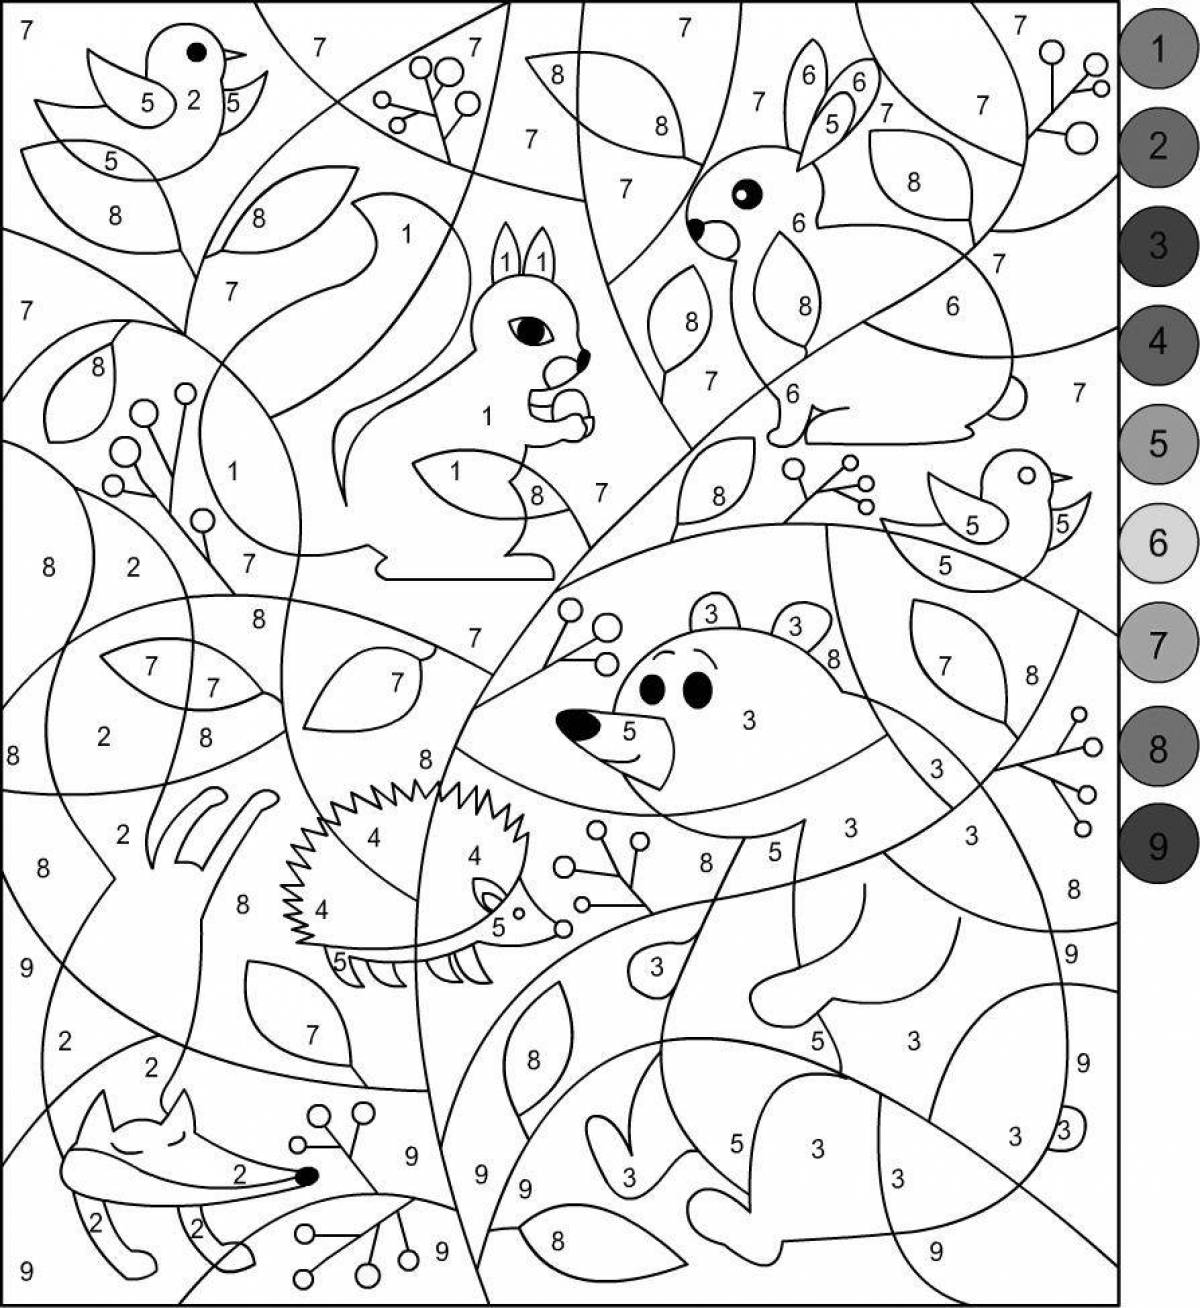 Joyful coloring for children 5-7 years old